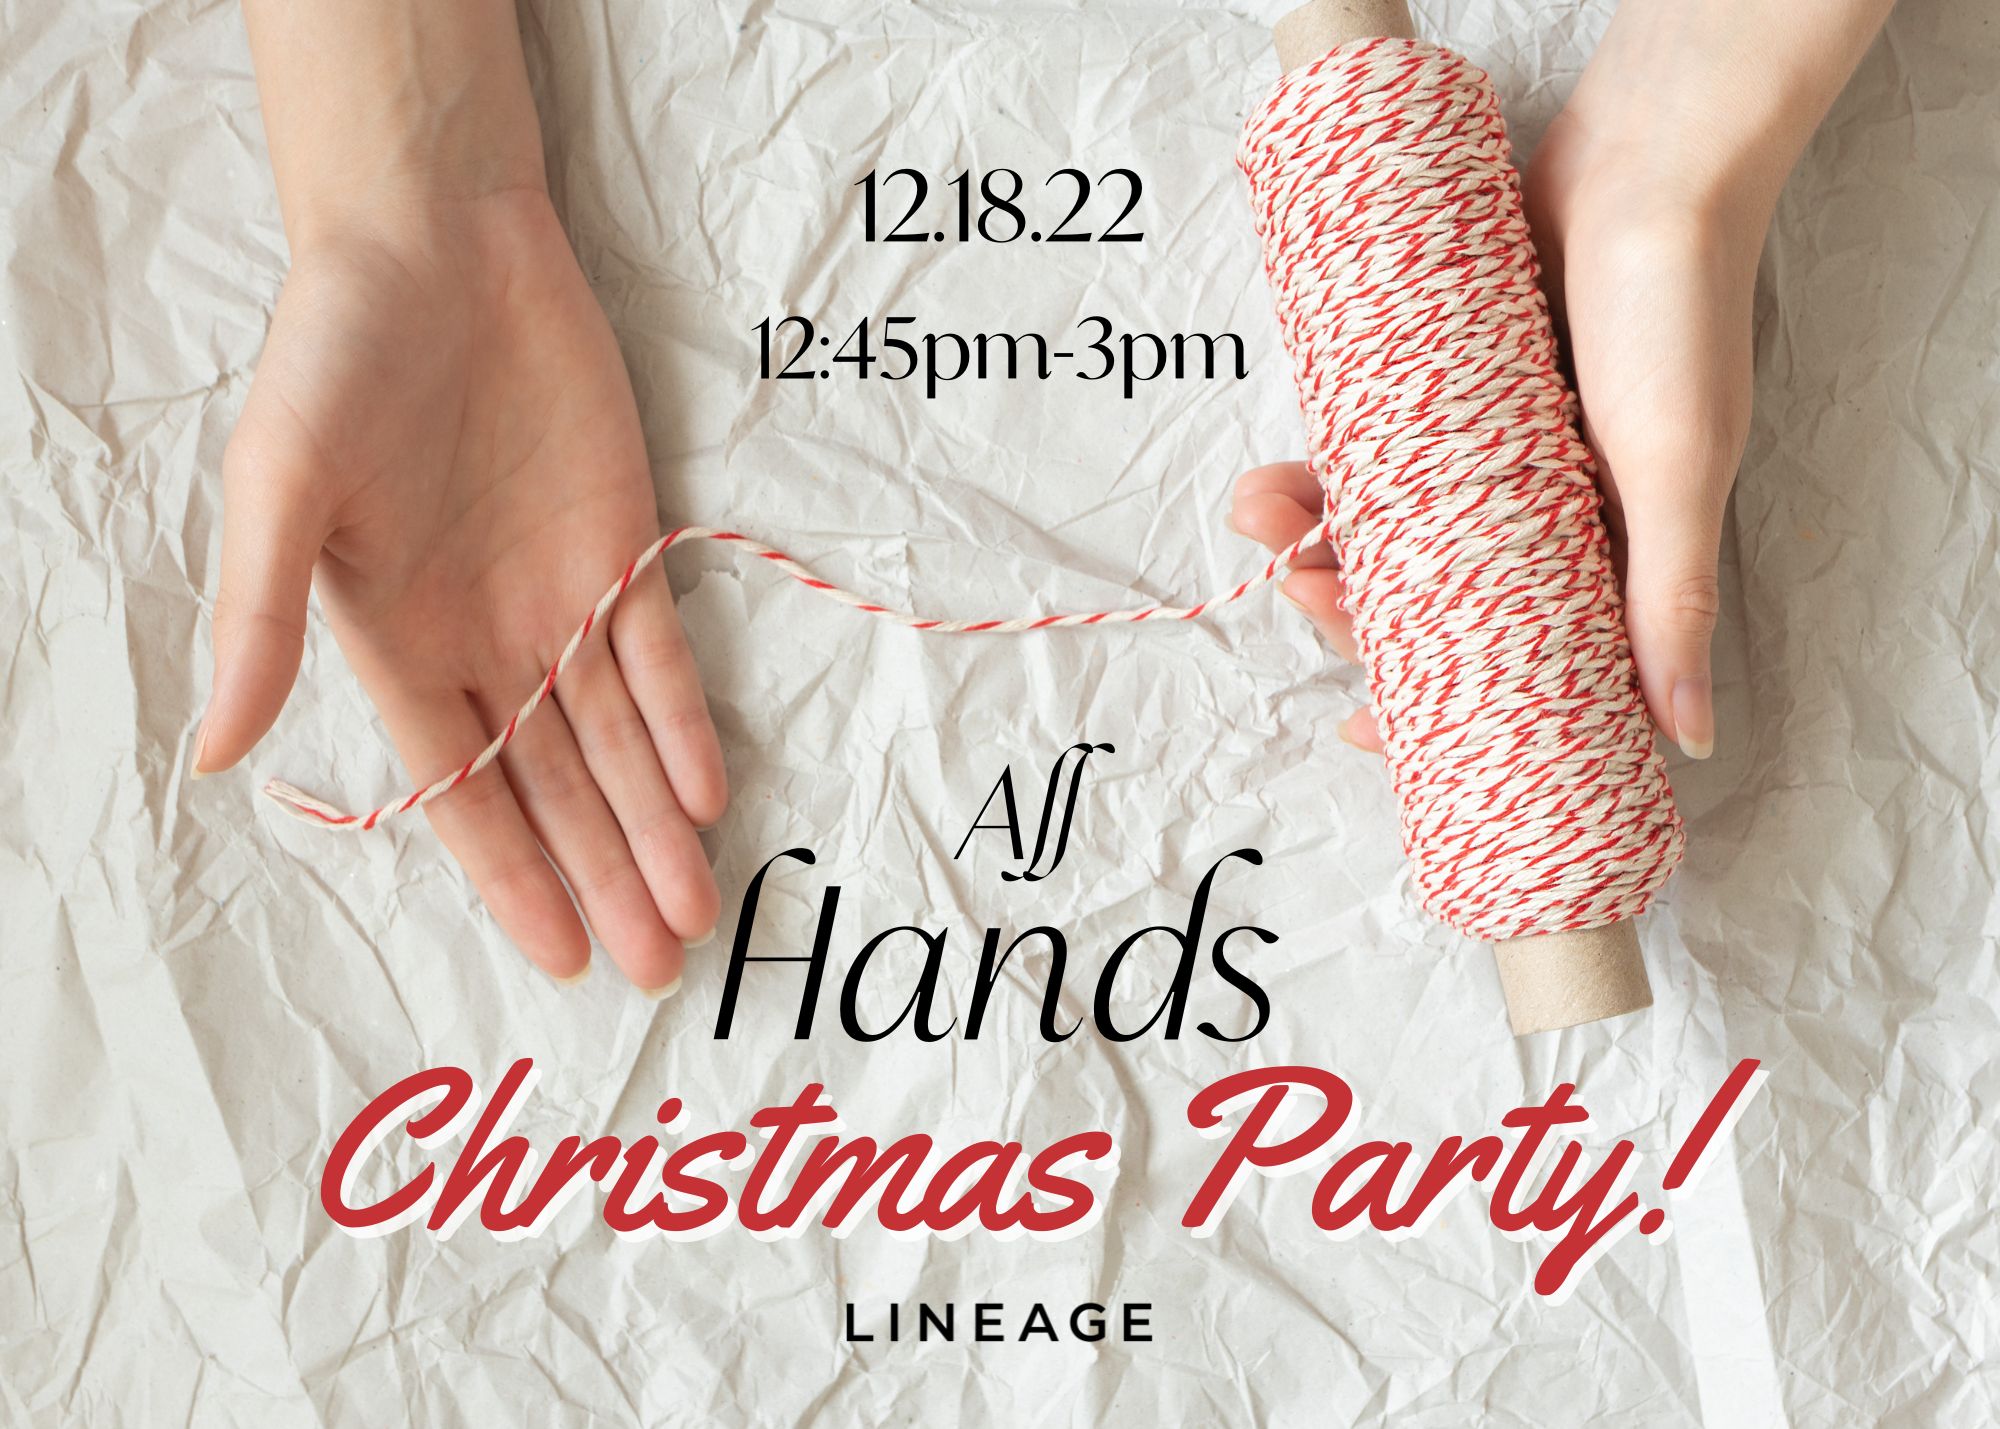 ALL Hands Christmas Party